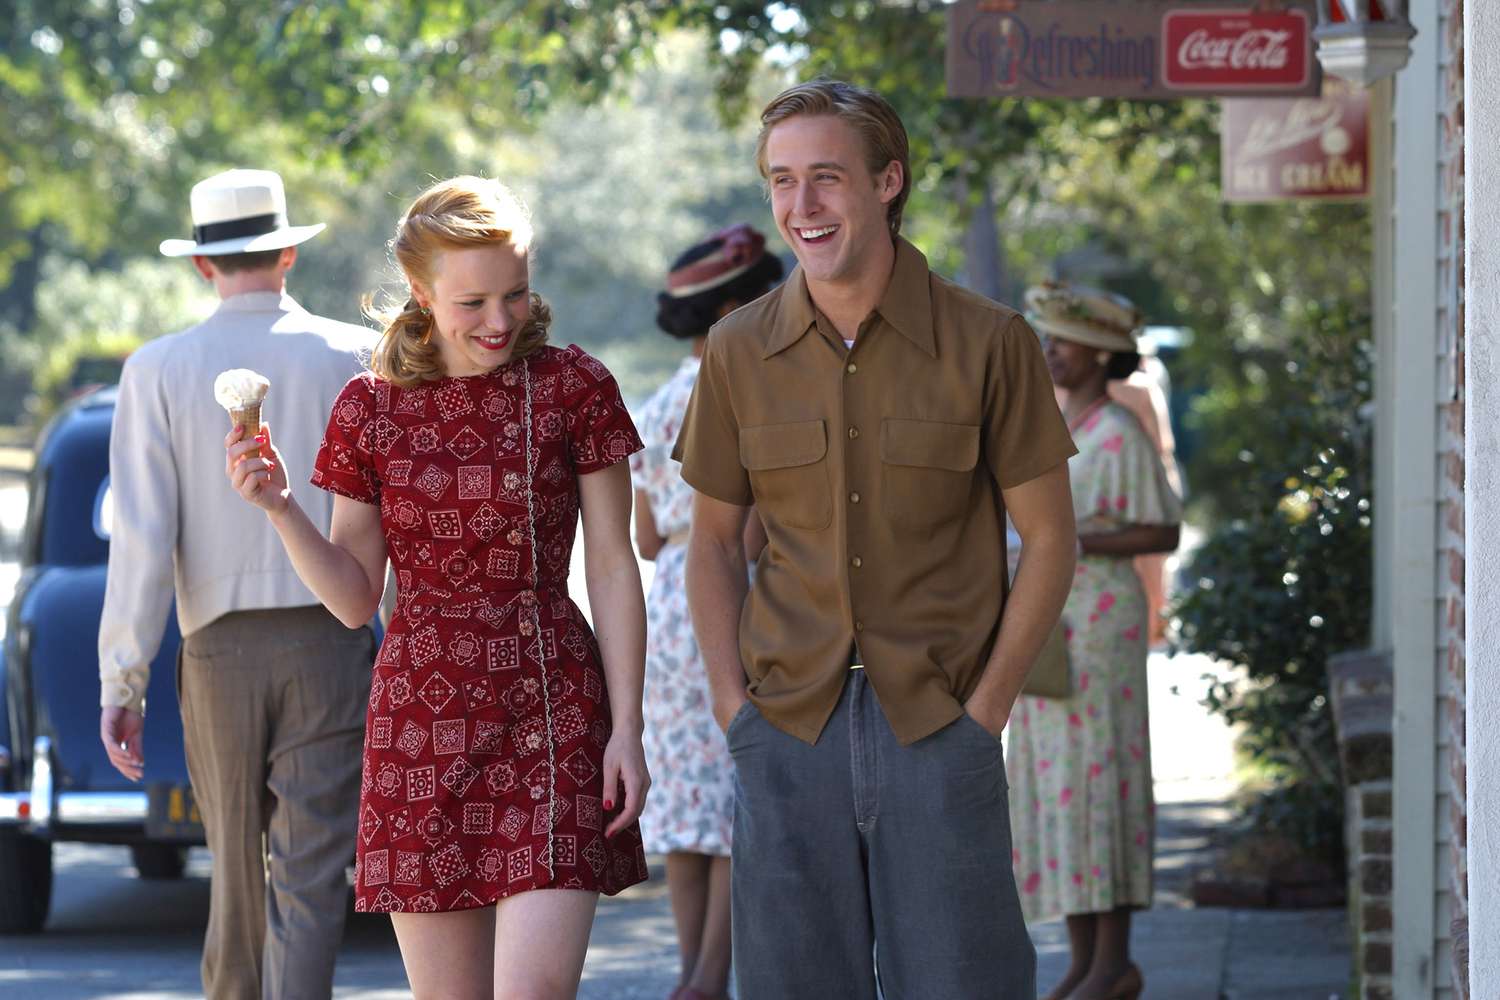 13 Movies Like The Notebook to Watch Now